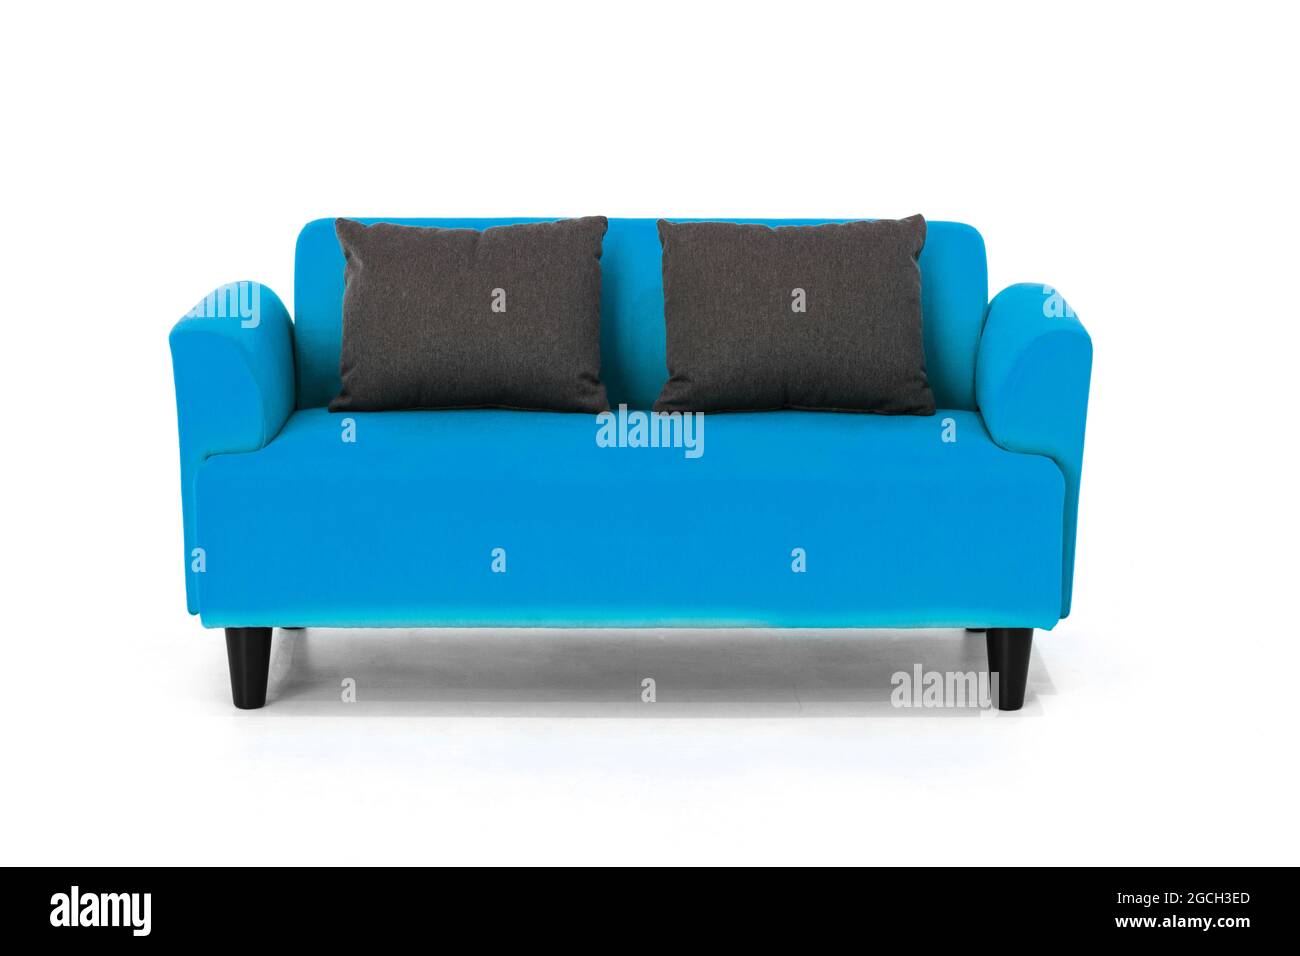 Blue Scandinavian style contemporary sofa on white background with modern and minimal furniture design for stylish living room. Stock Photo